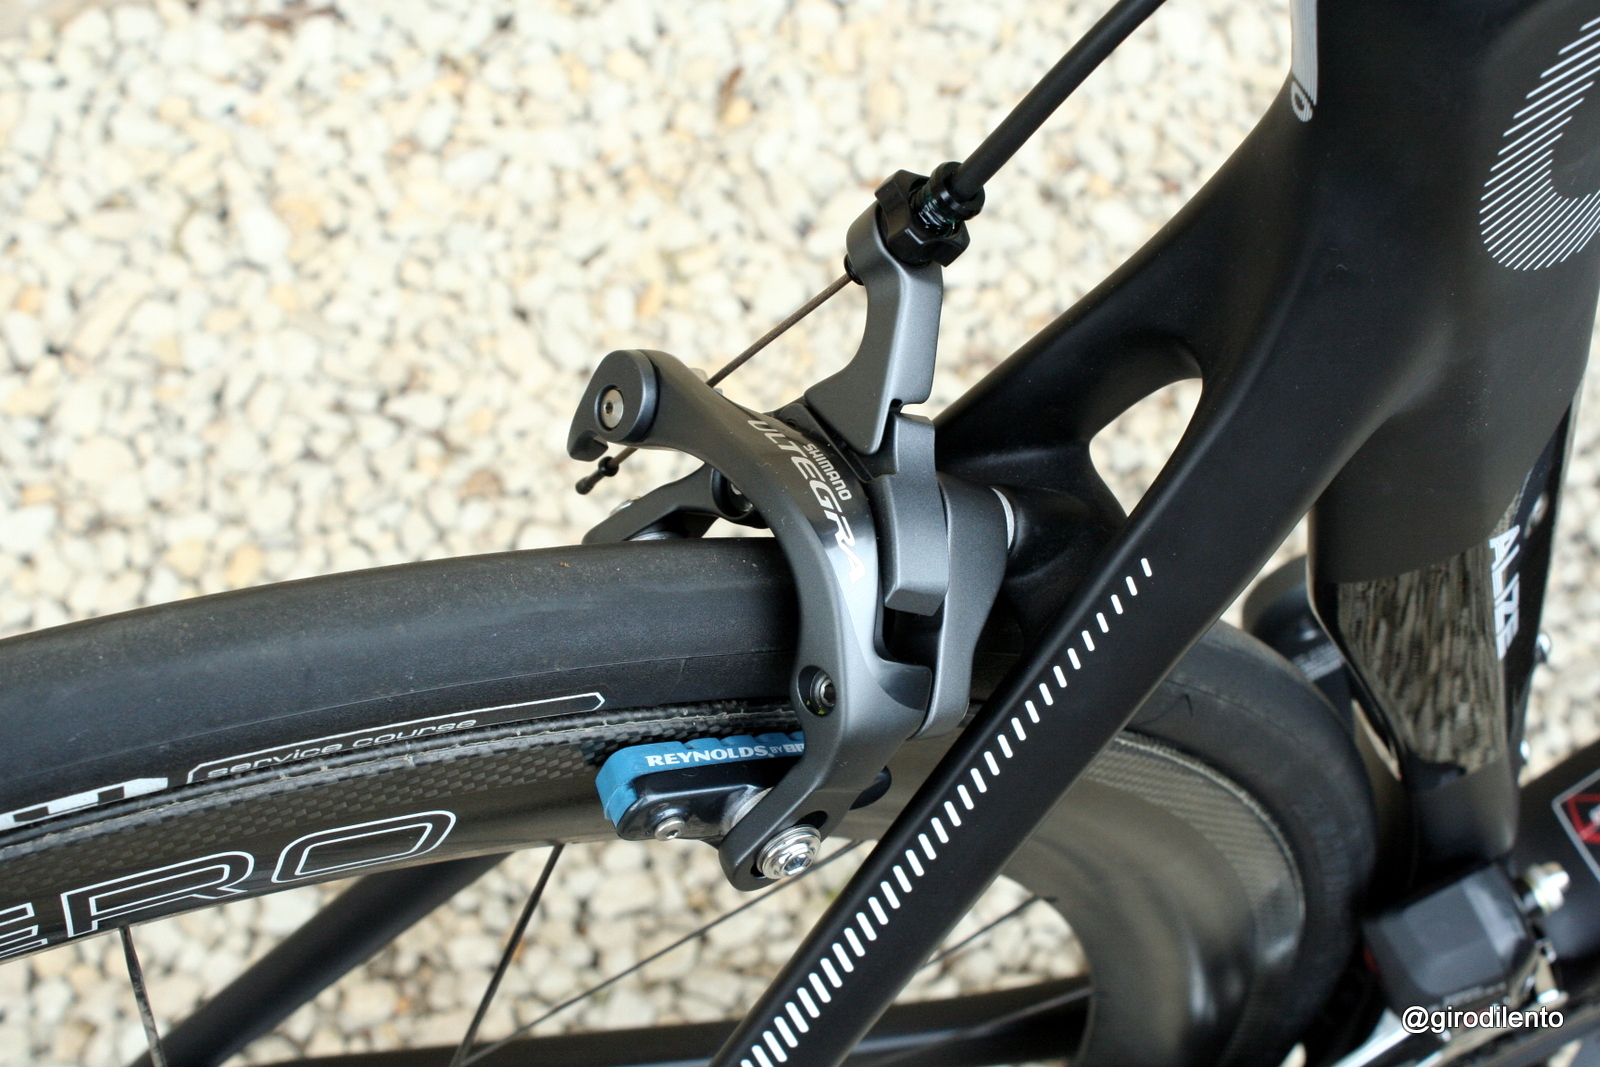 Ultegra 6800 brakes have been highly praised - looking forward to trying them out